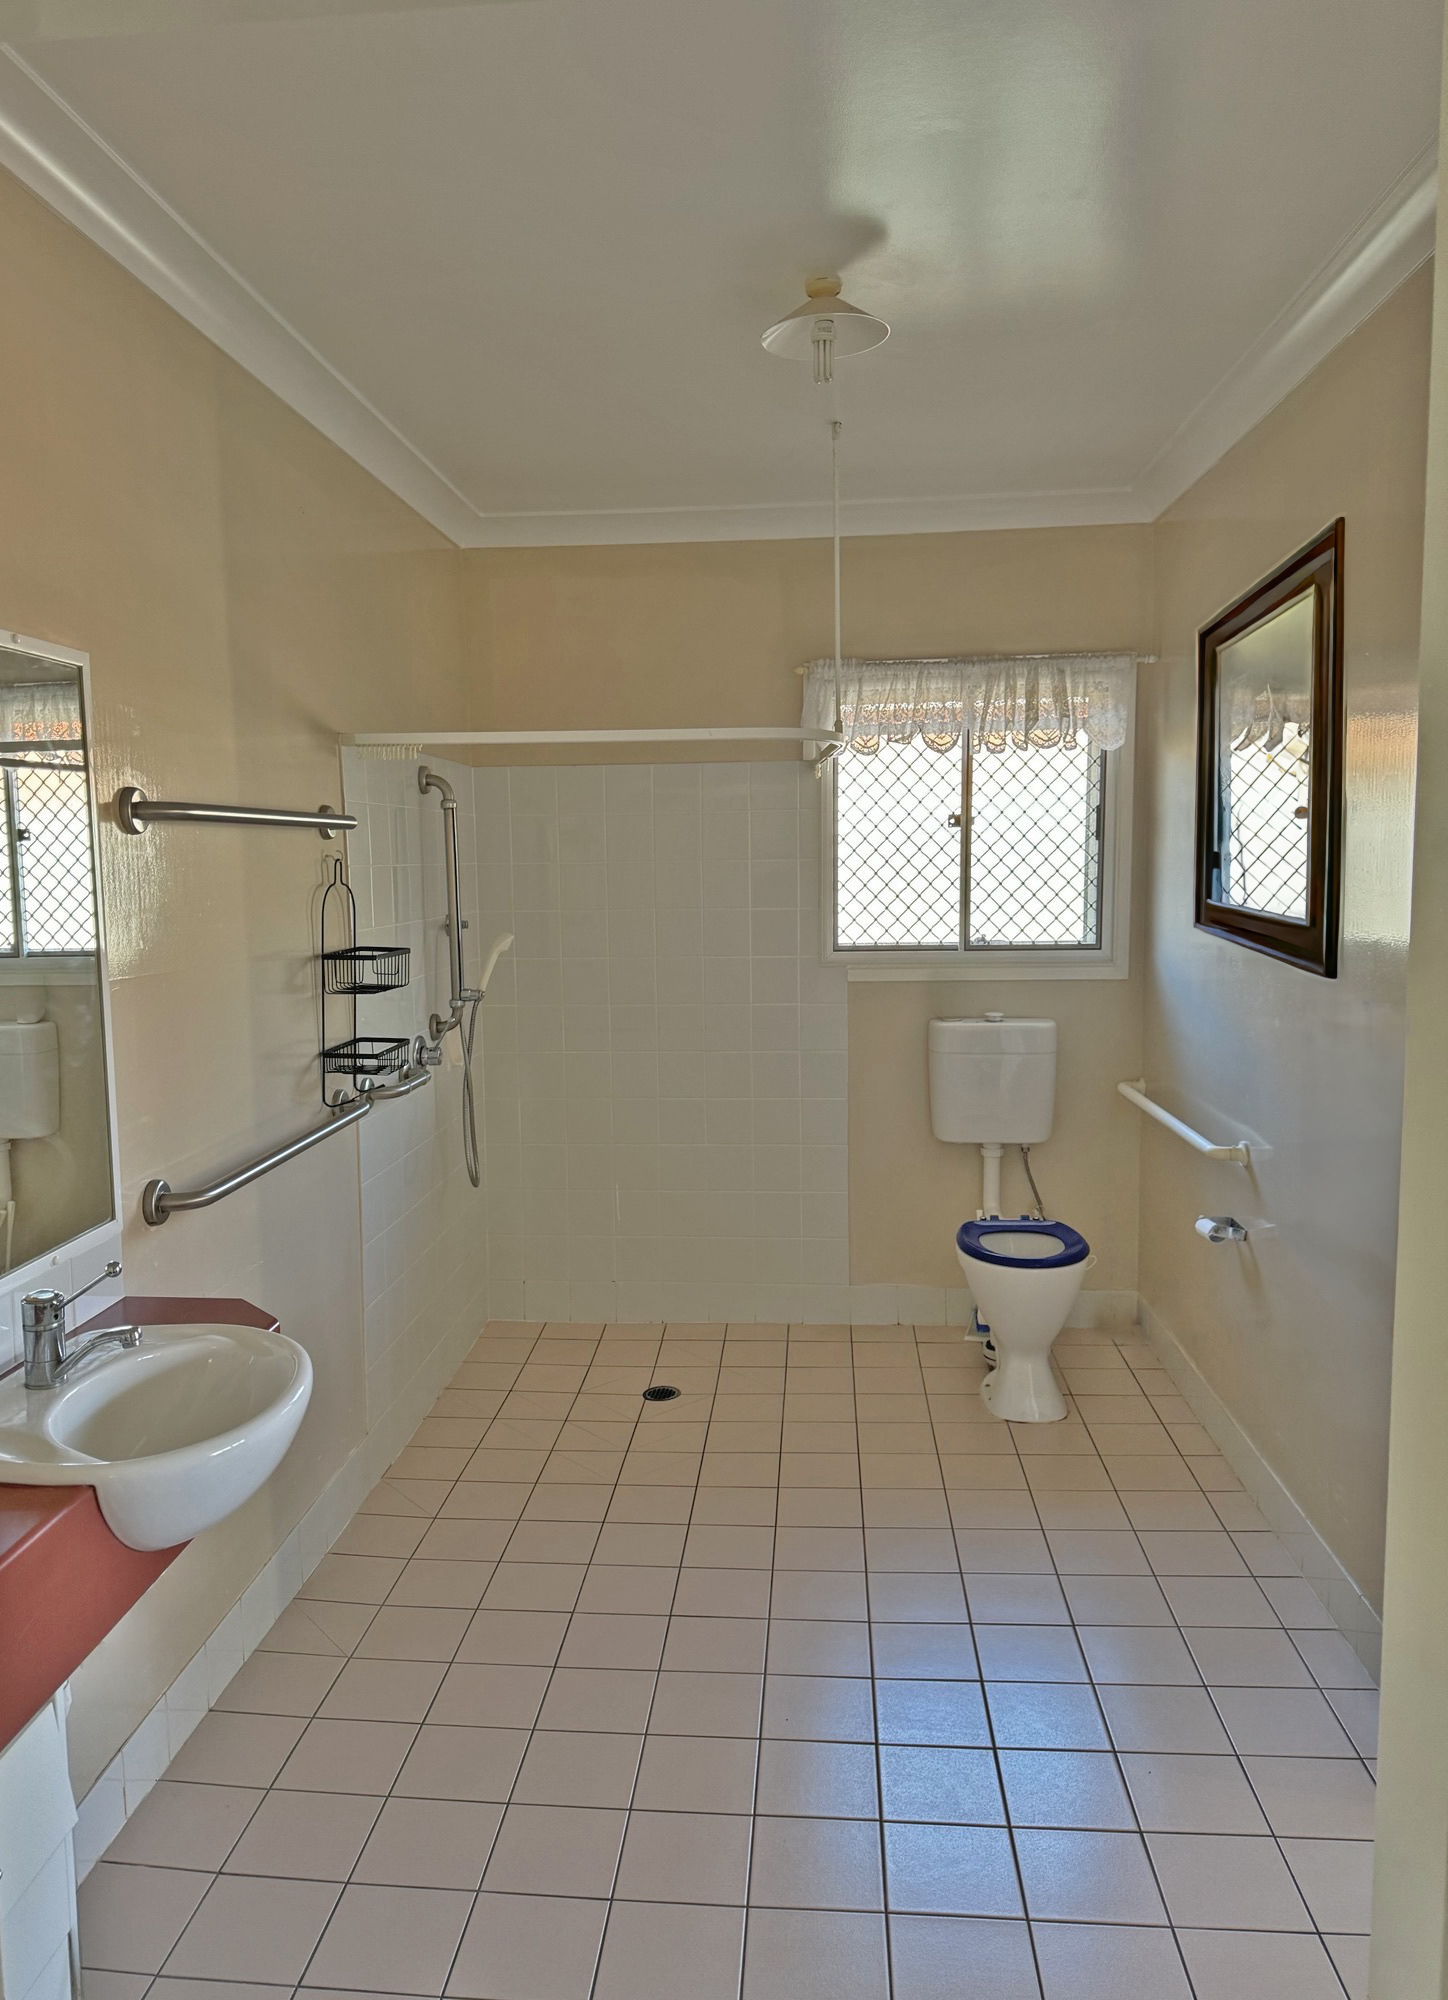 An image showing the bathroom, there is a shower, tiling and a mirror visible.